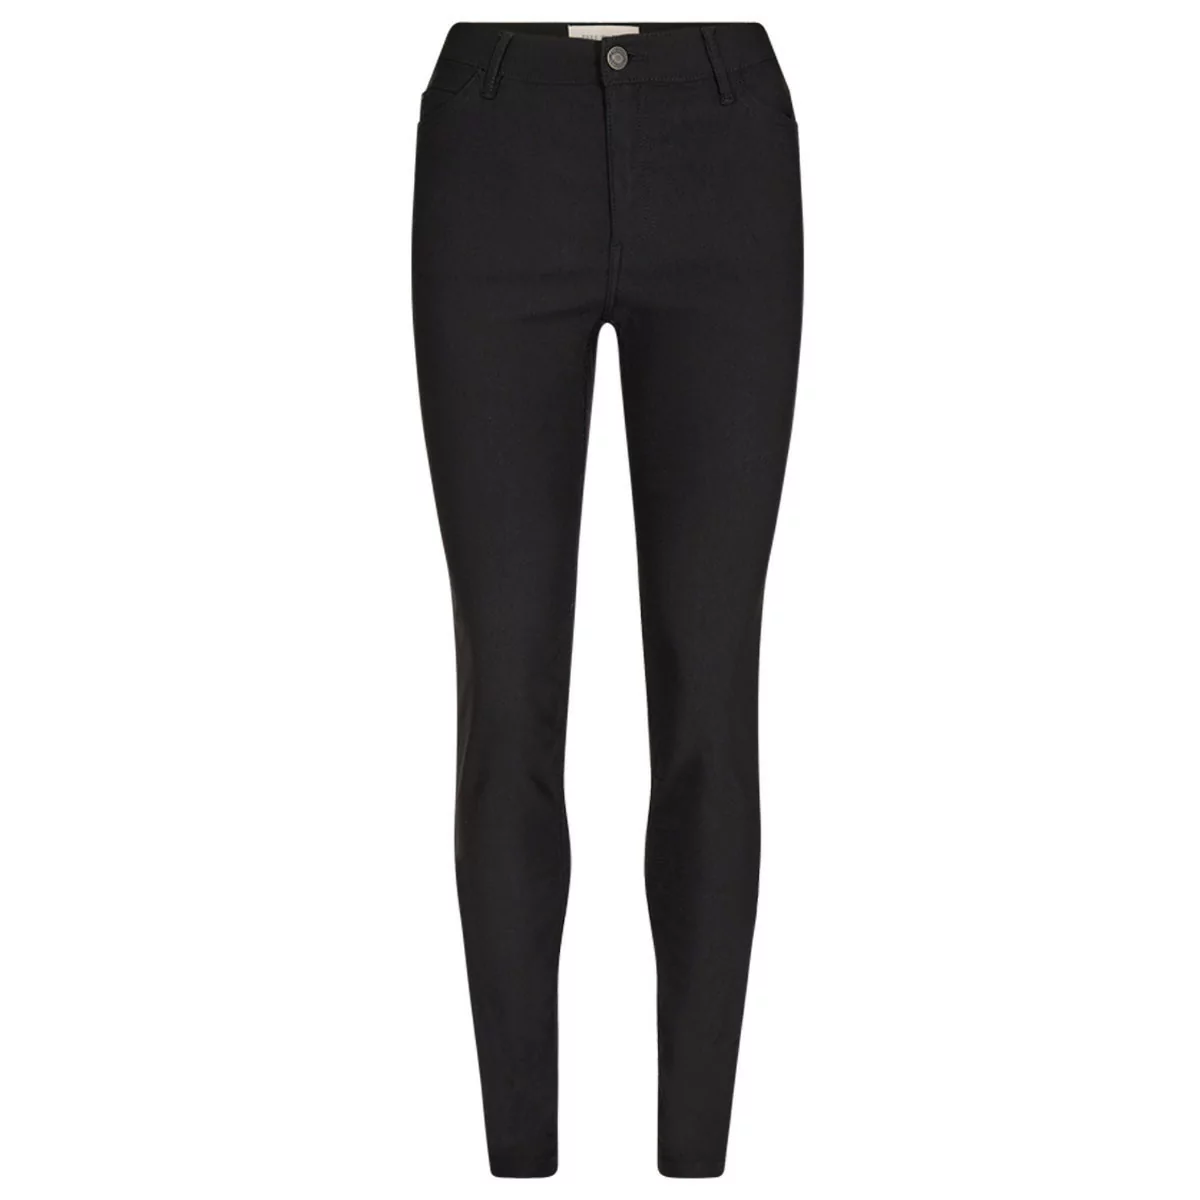 Black FQSHANIA-PANT 202615 fra Freequent